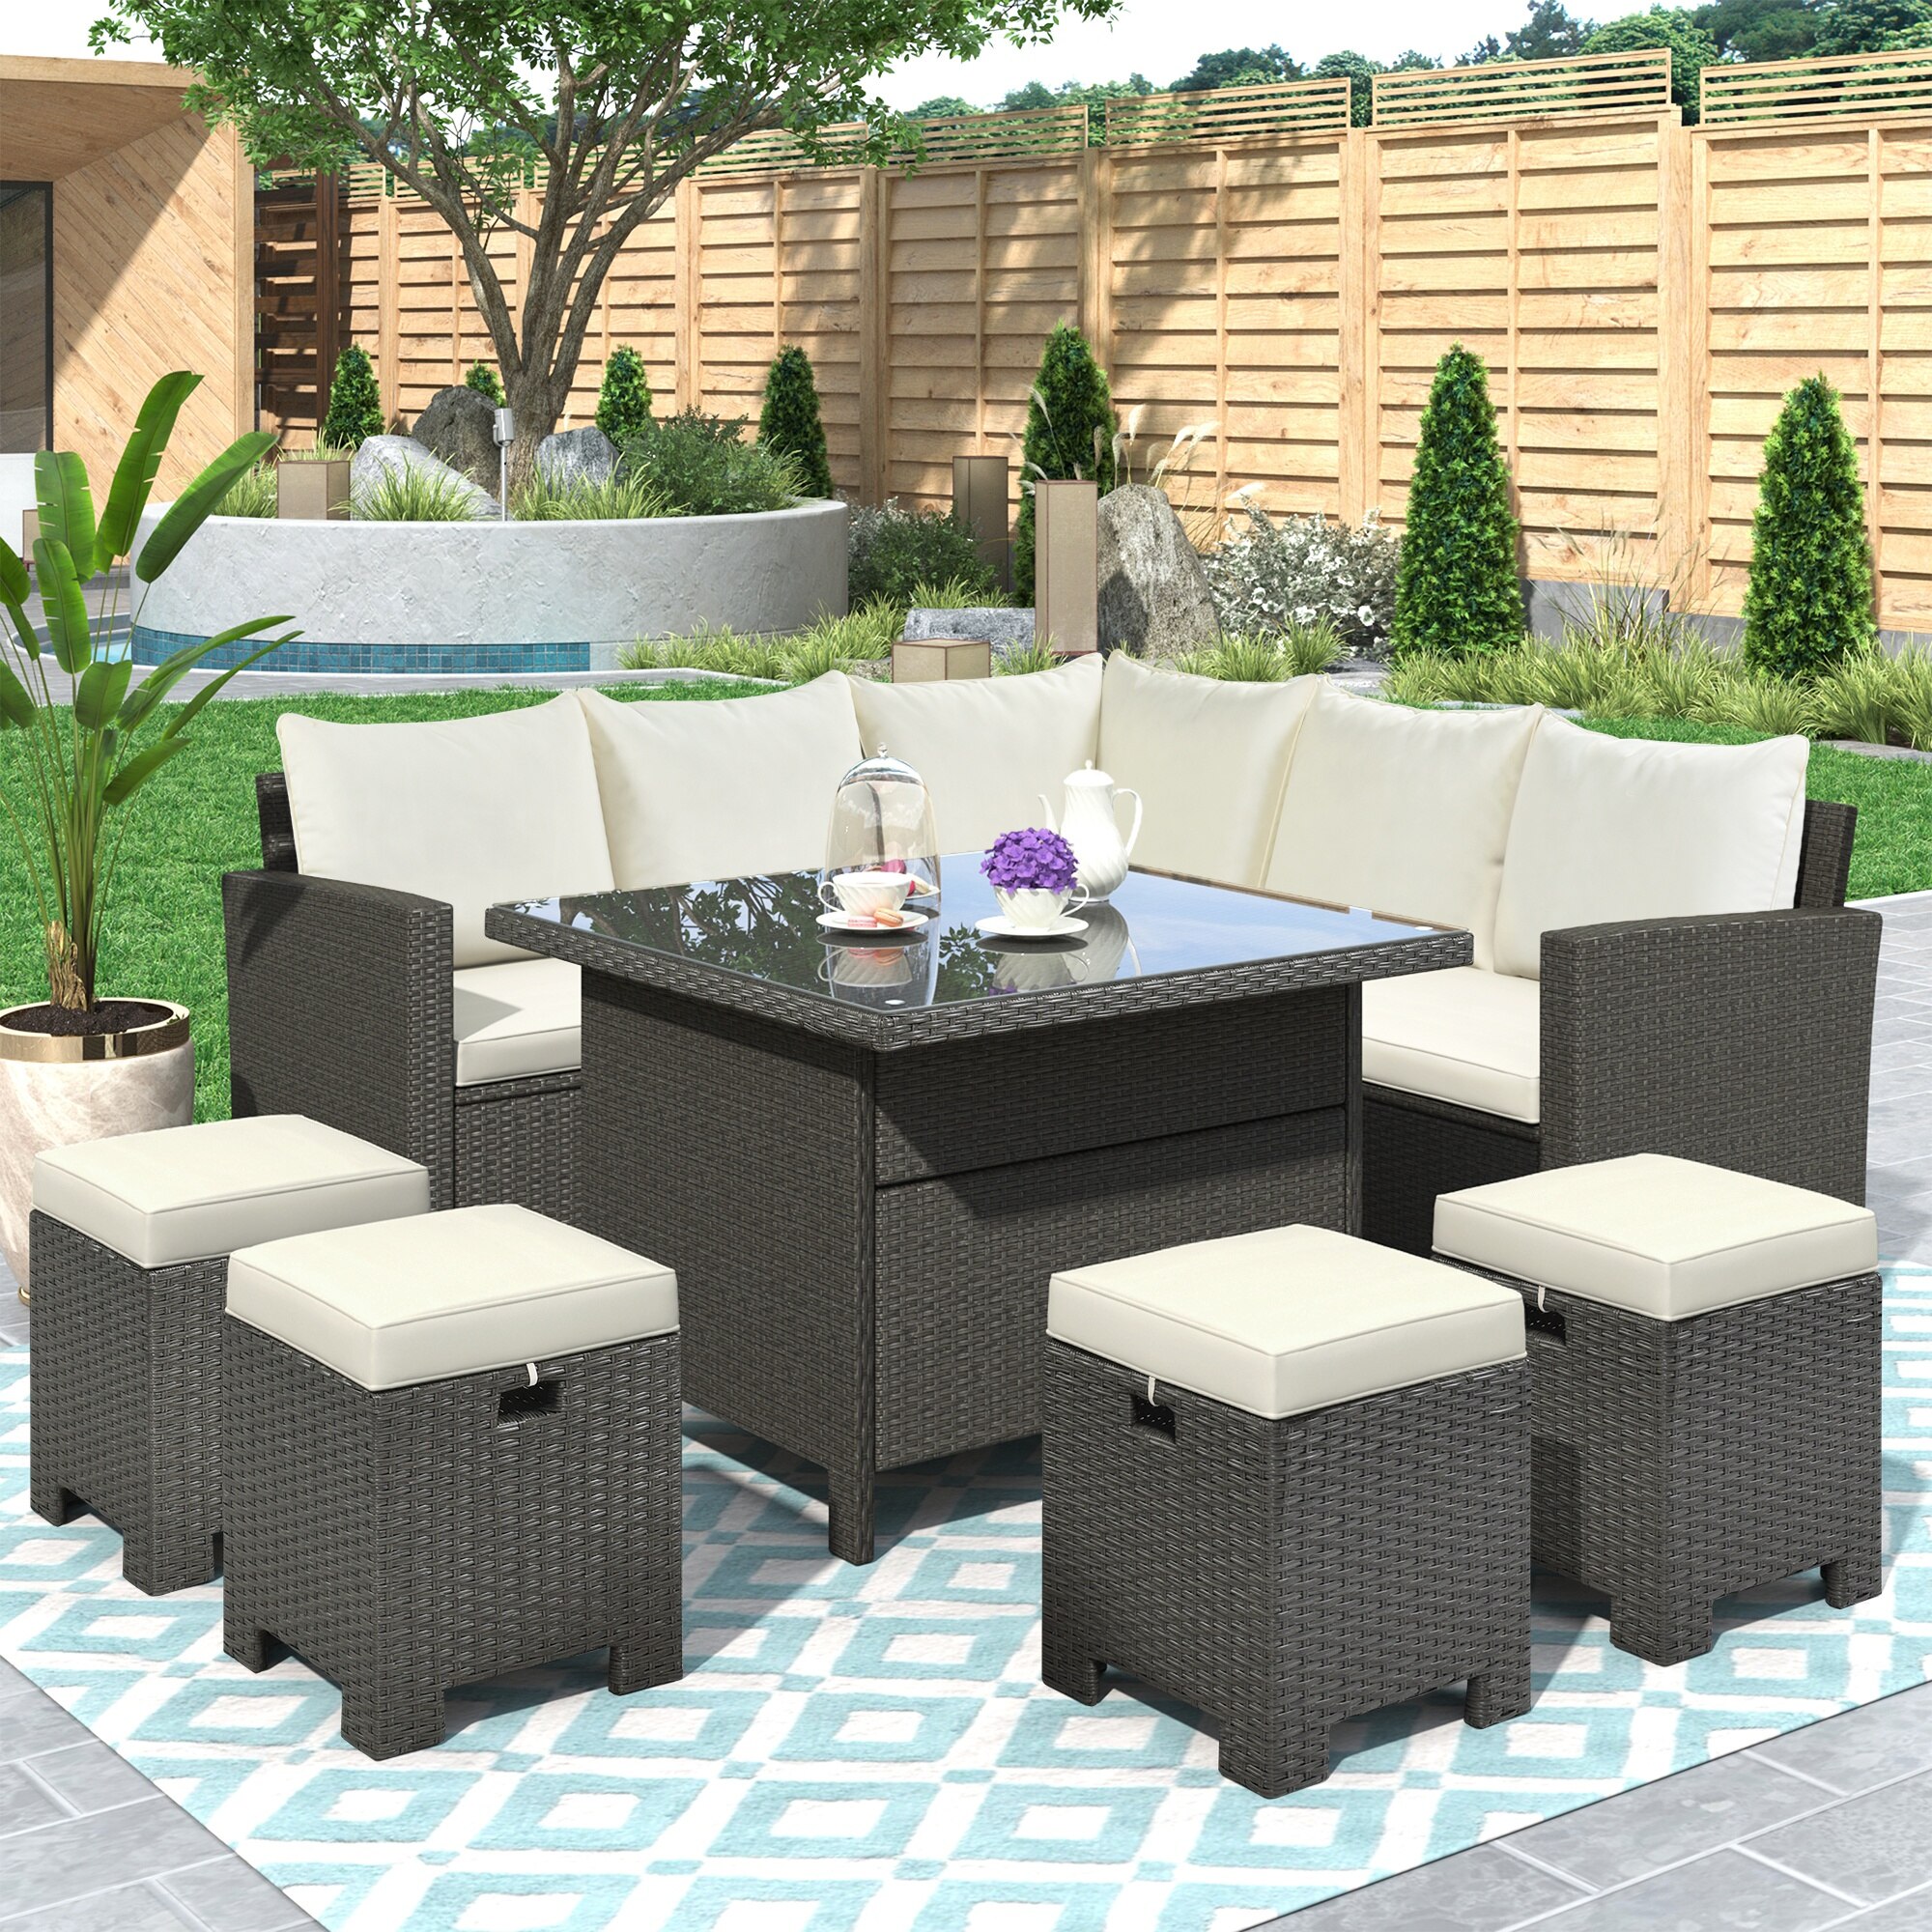 Outdoor Furniture Garden Sofas Patio Furniture Set 8 Piece Outdoor Conversation Set Dining Table Chair With Ottoman Cushions